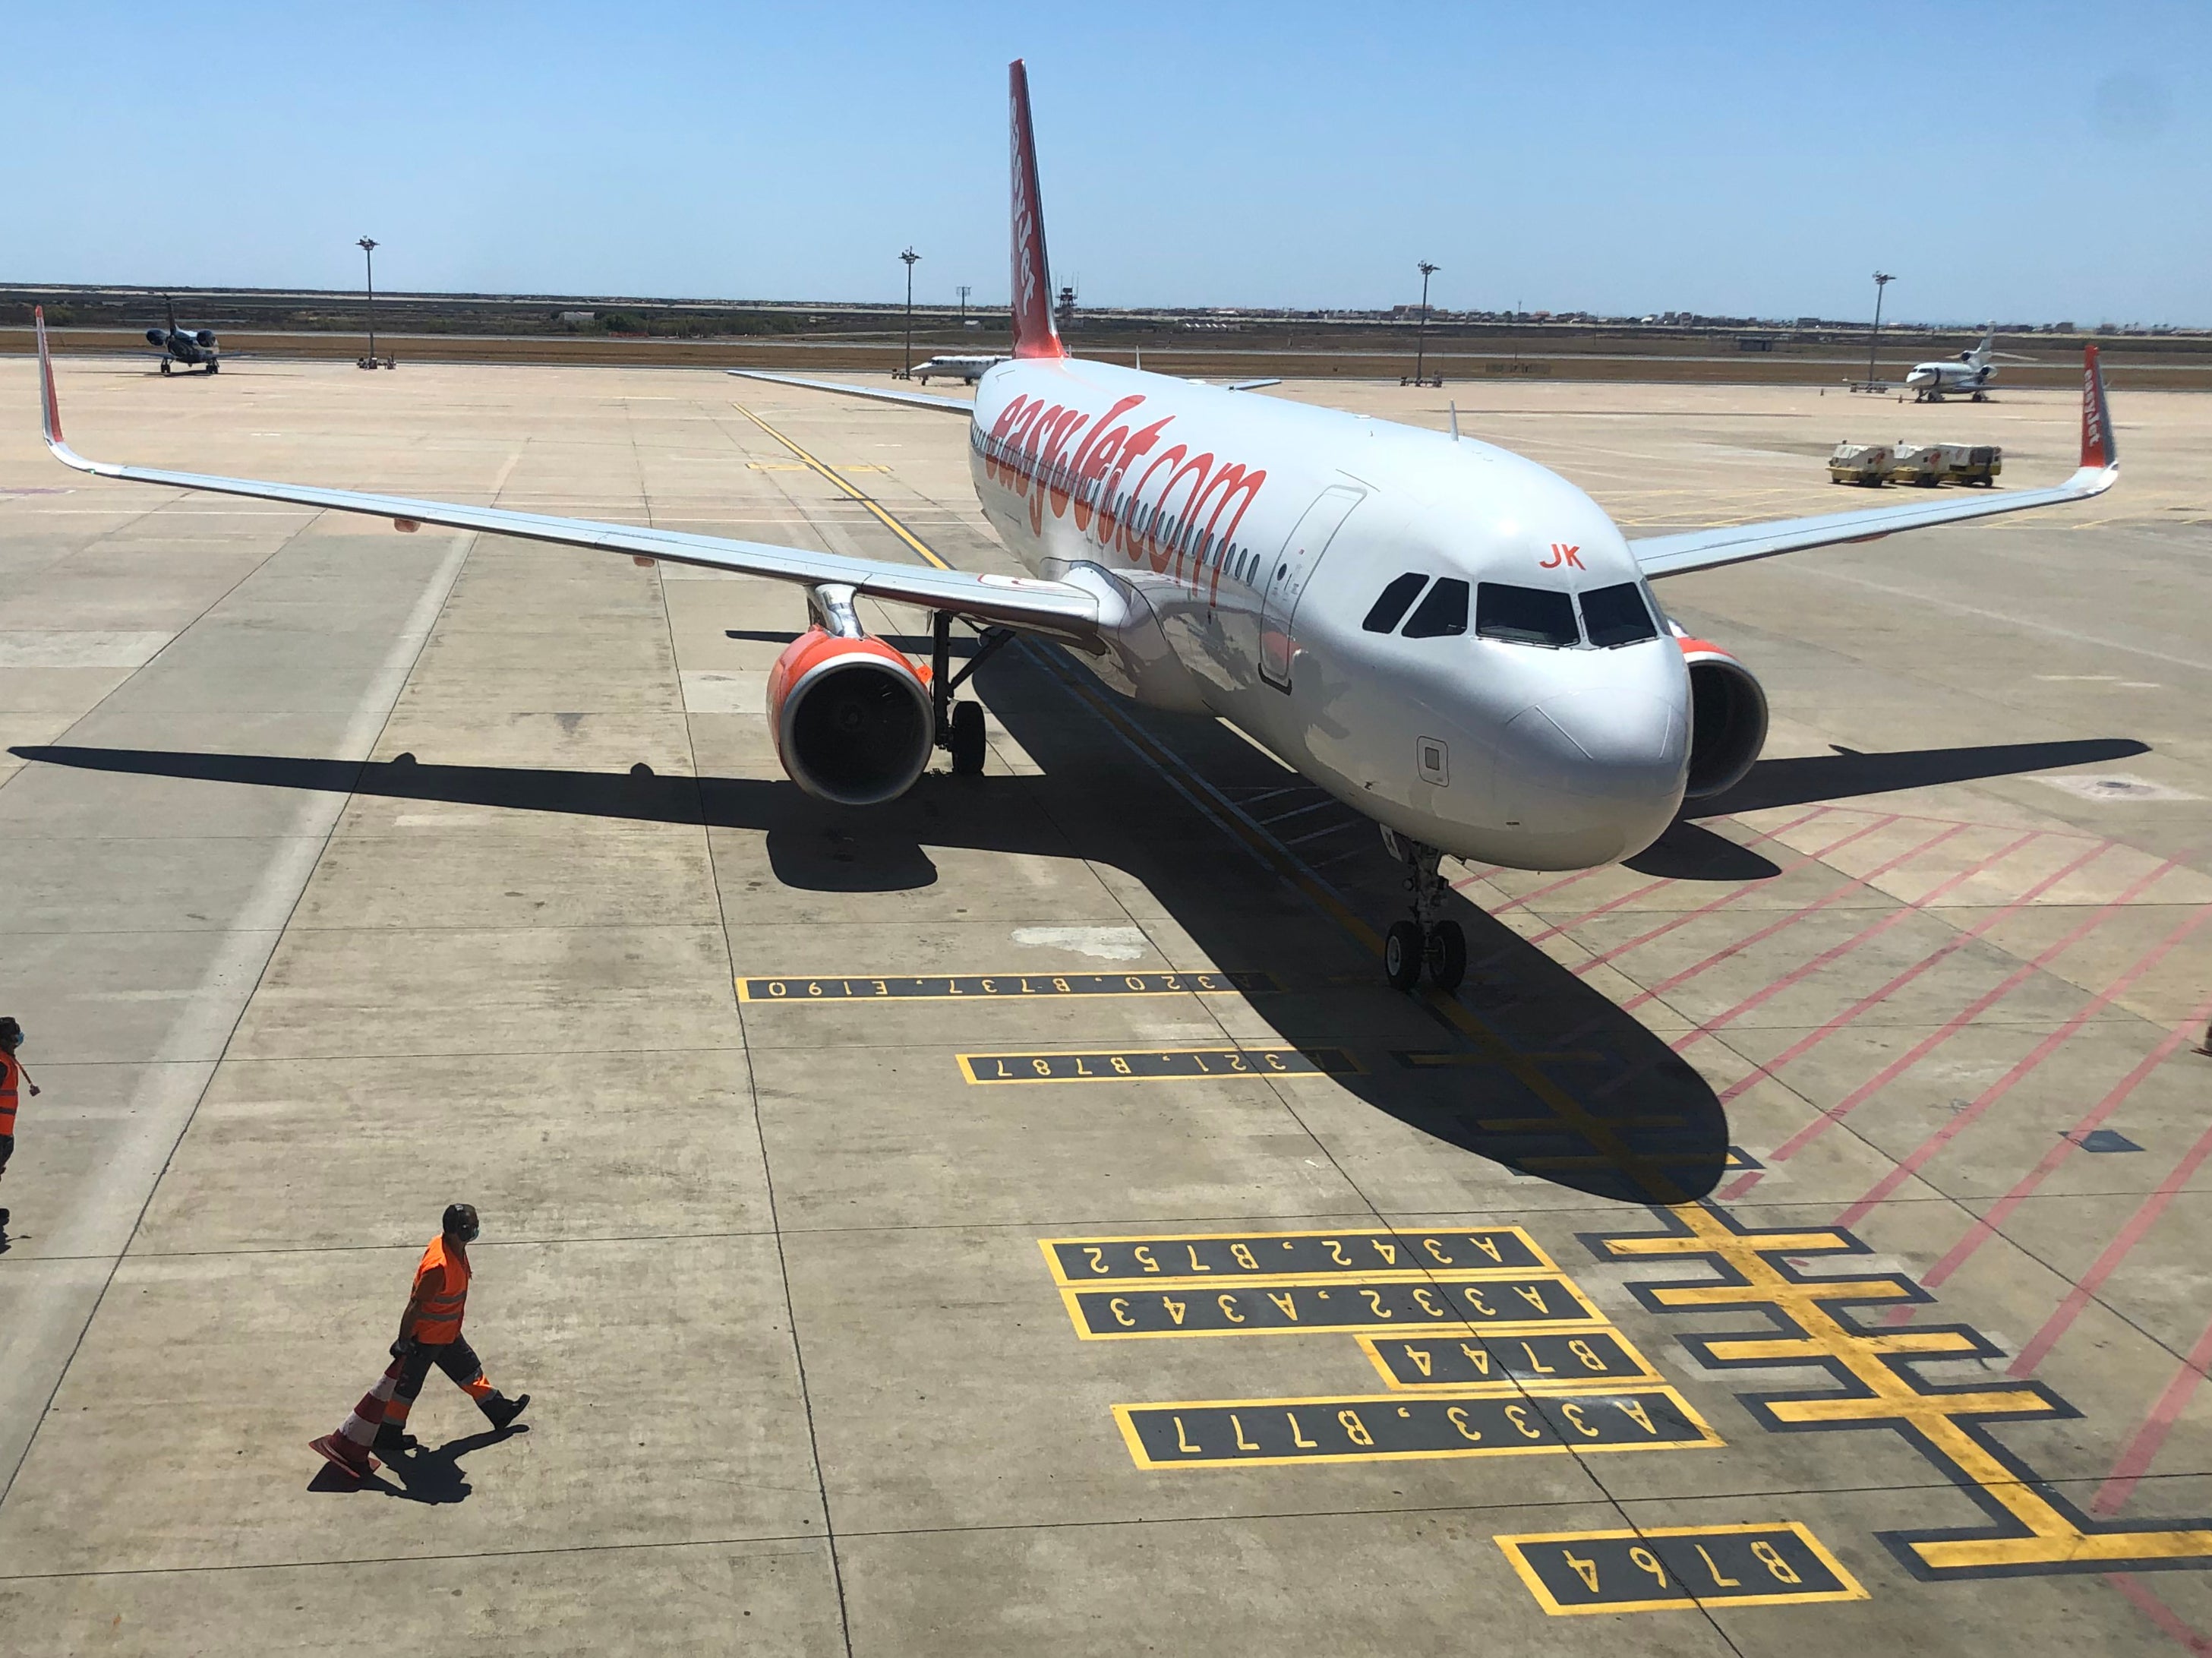 <p>Departing soon: an easyJet Airbus A320 at Faro airport in southern Portugal</p>